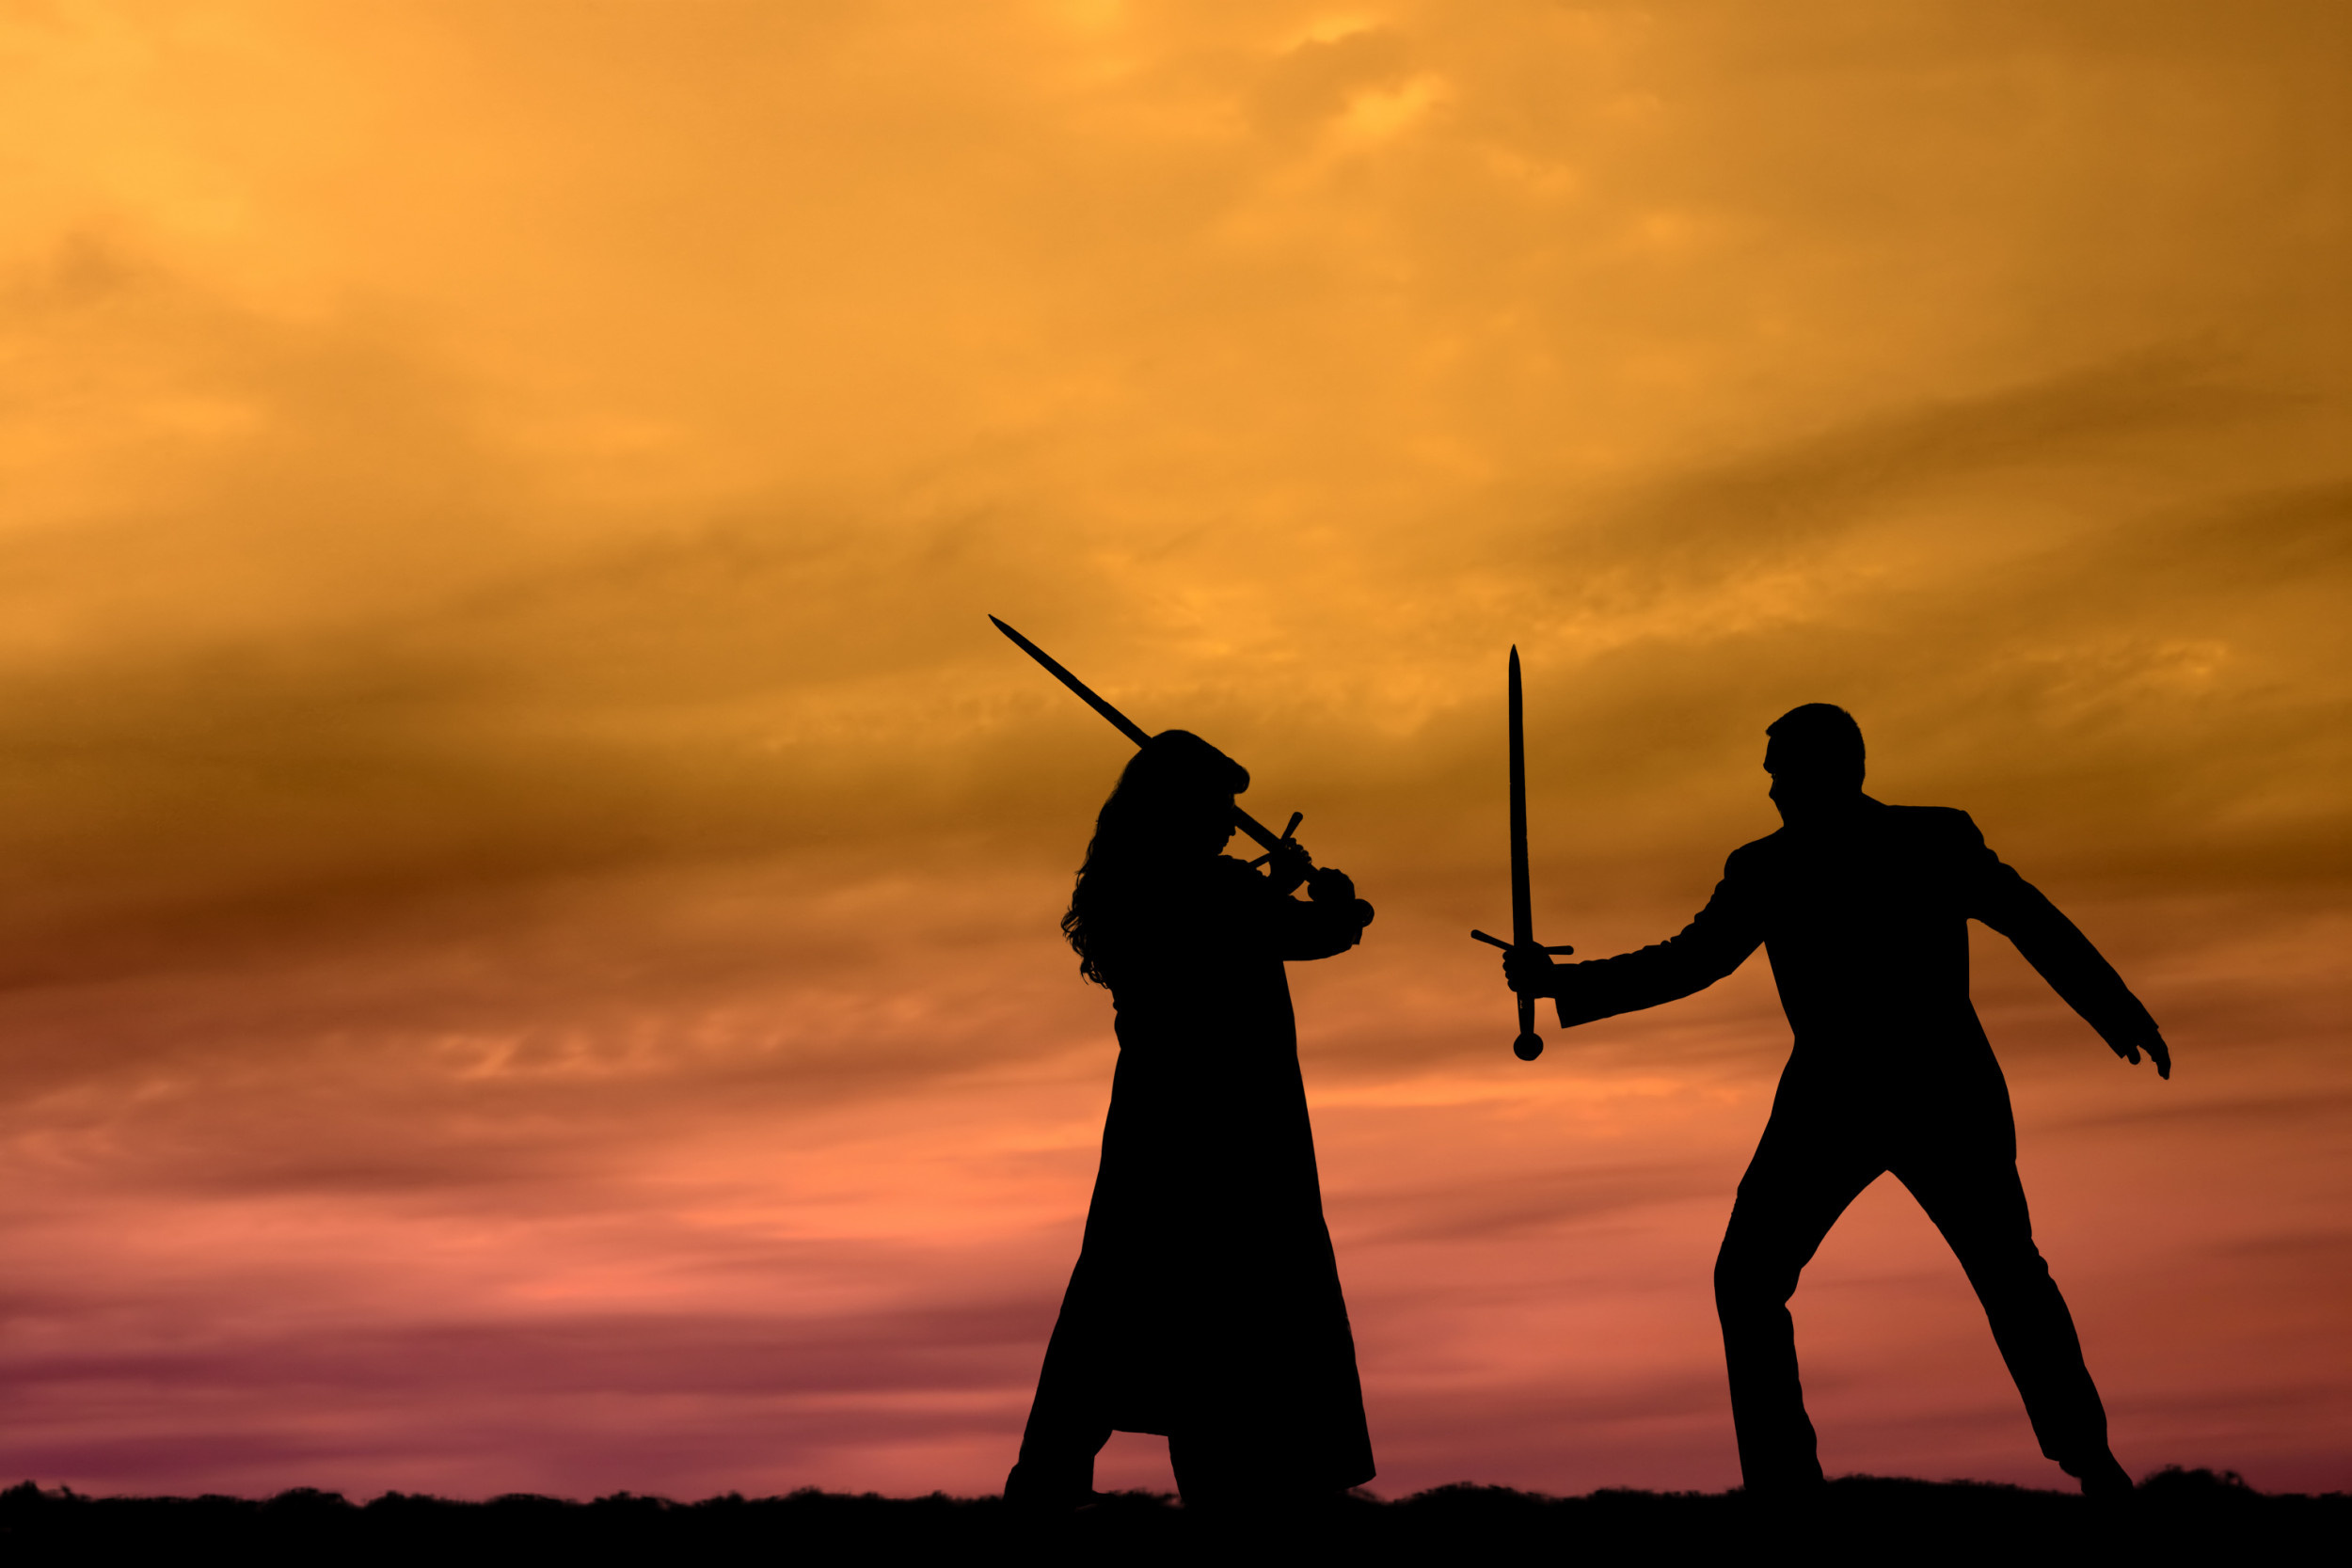 Sword Fighting: Duel of shadows, Silhouettes, Woman with a sword, Woman vs. Man fight, Medieval warriors. 2500x1670 HD Background.